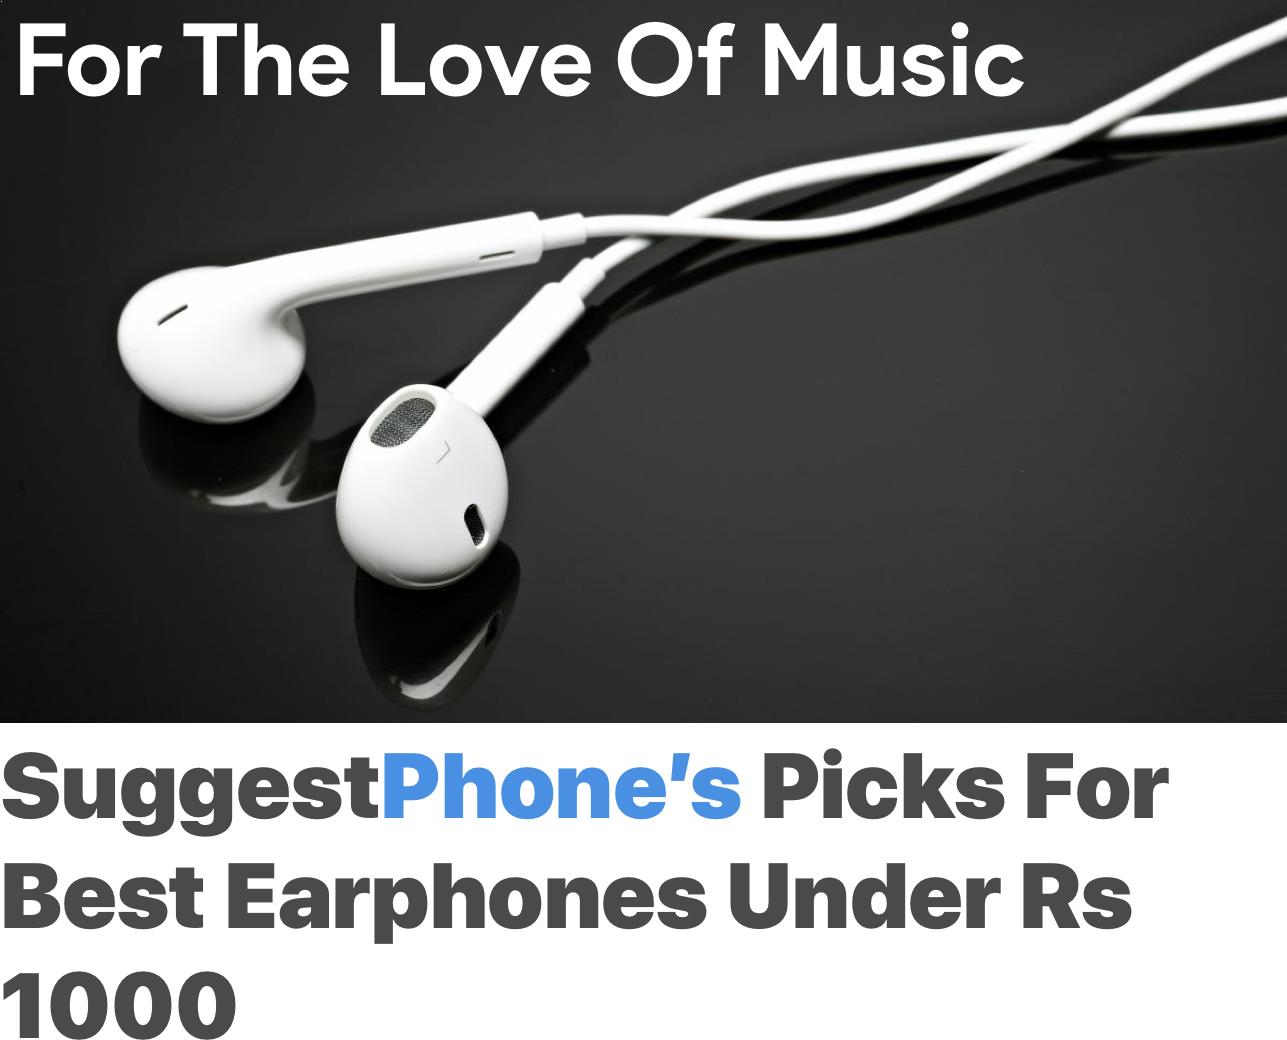 Types of Earphones and how to select the best earphone